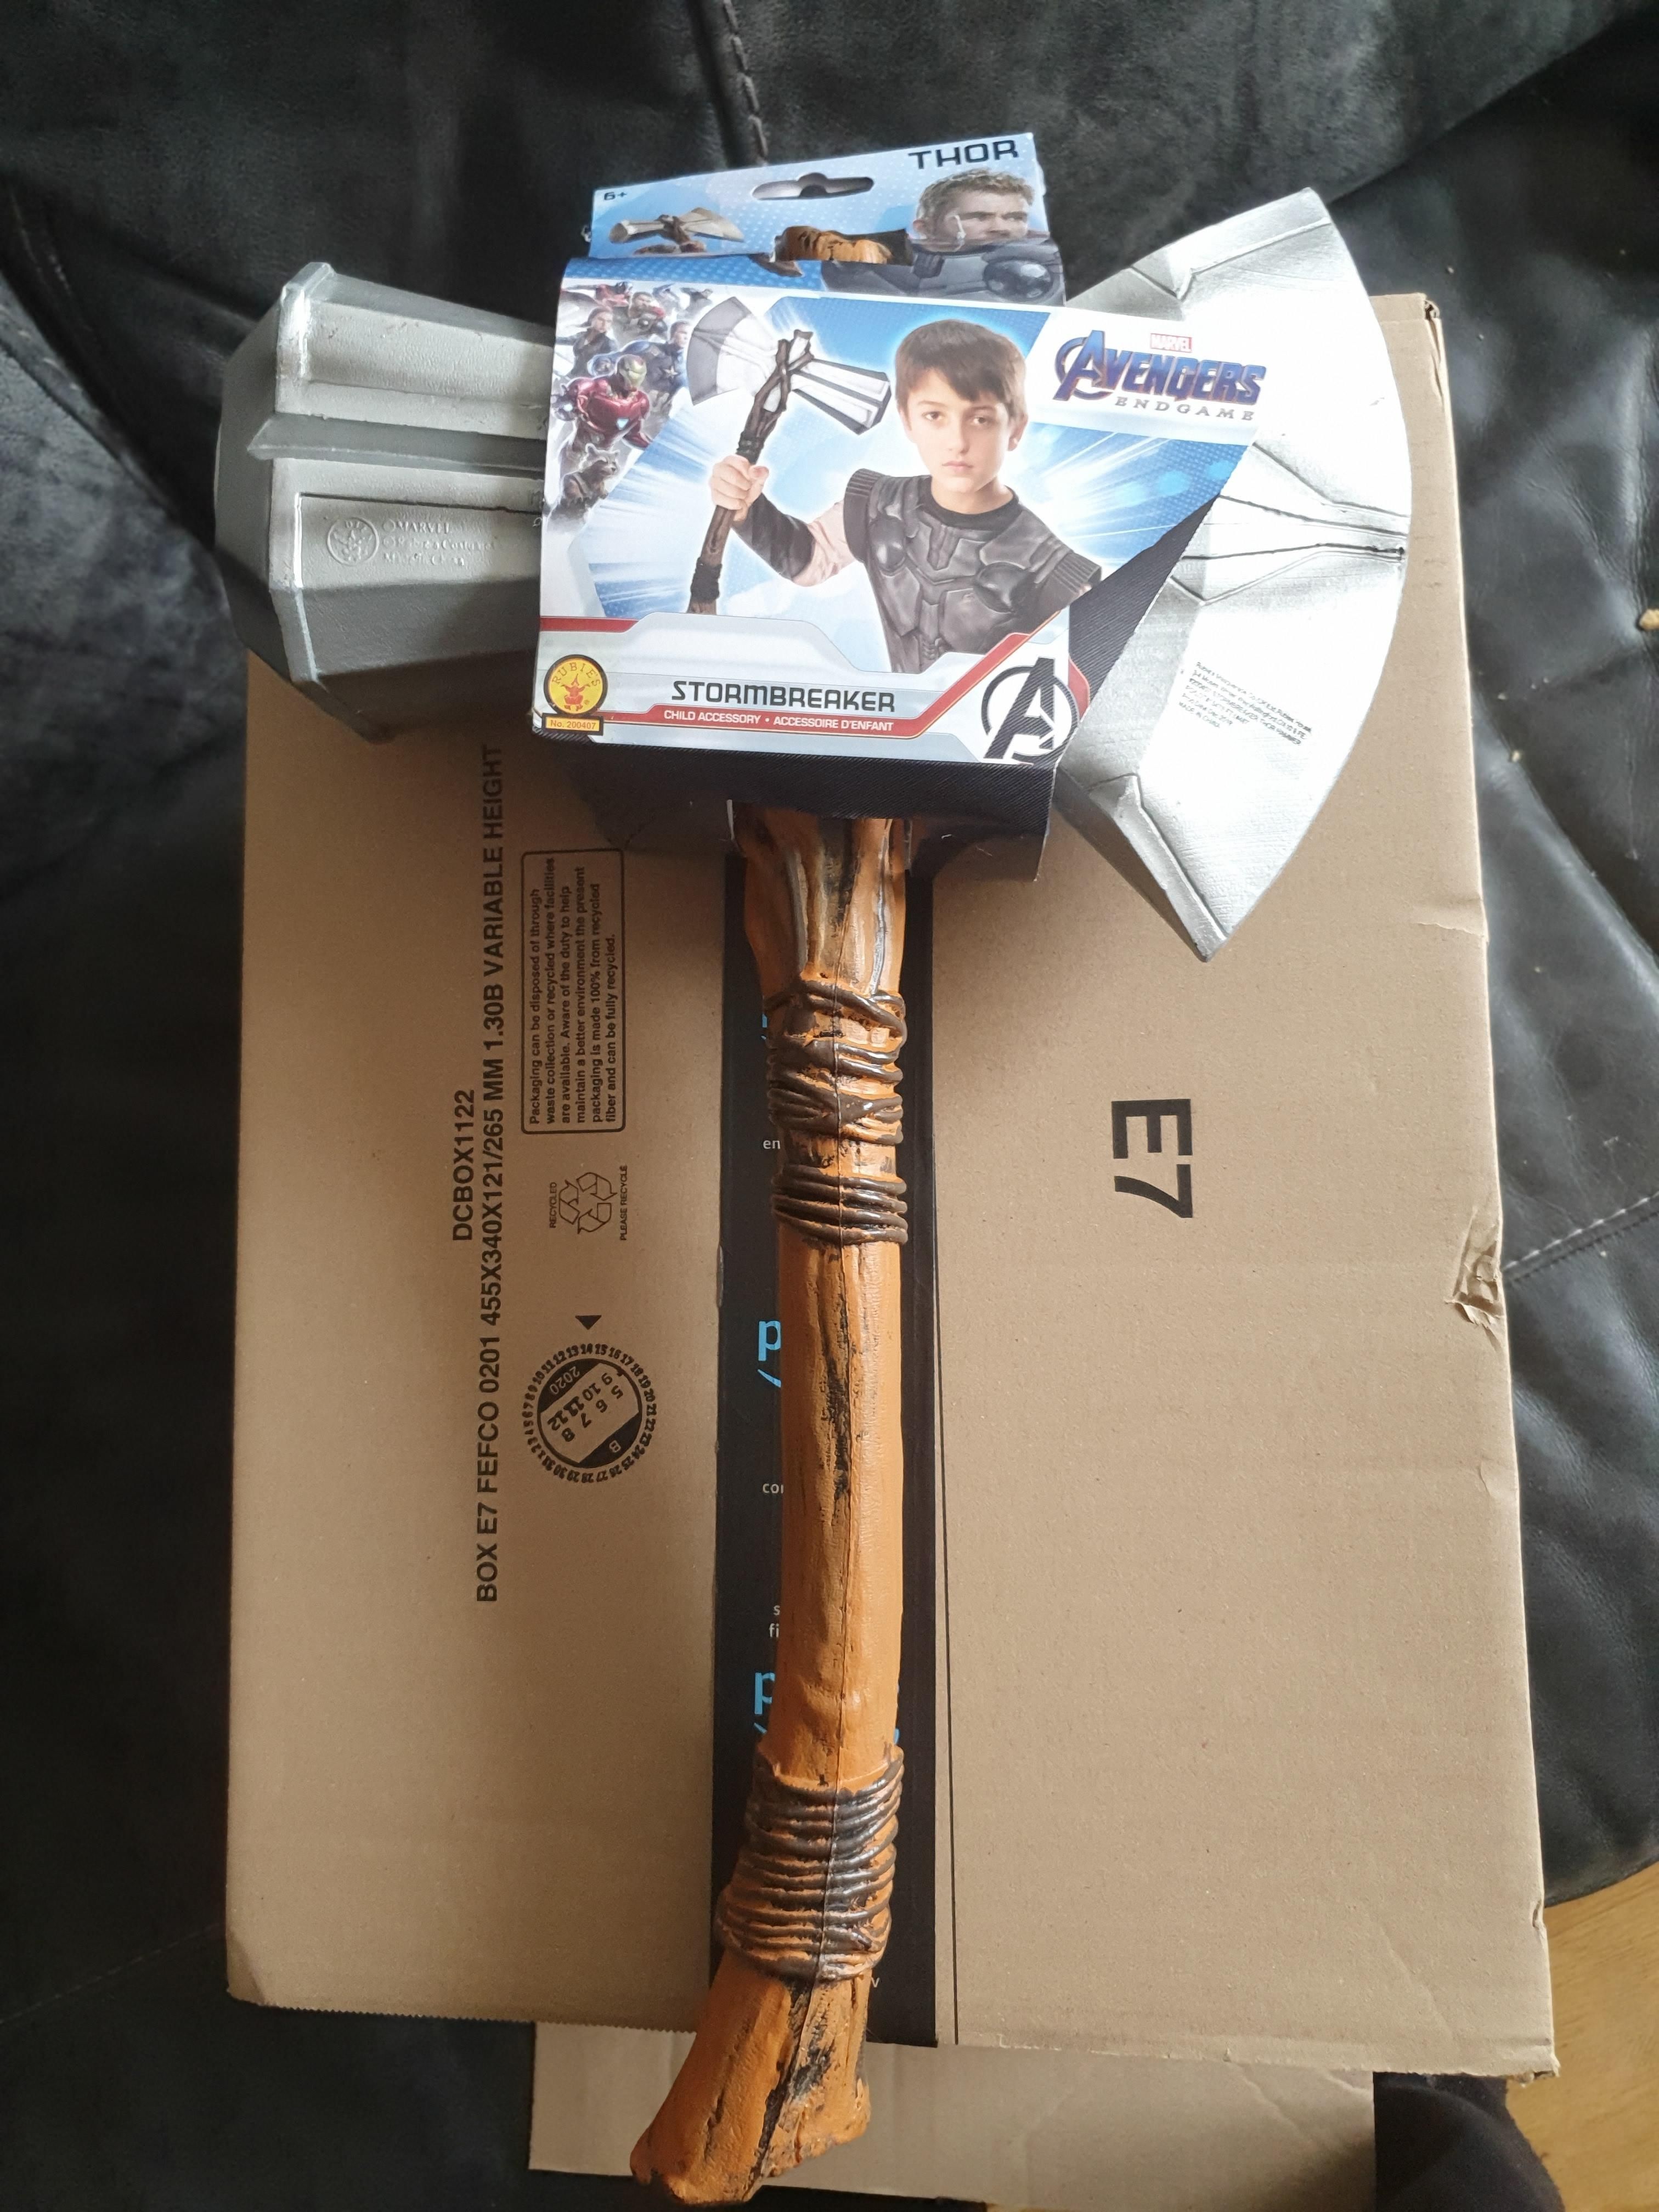 My GF ordered some ankle weights for running and somehow got sent this instead...trying to convince her to just go out running with the hammer